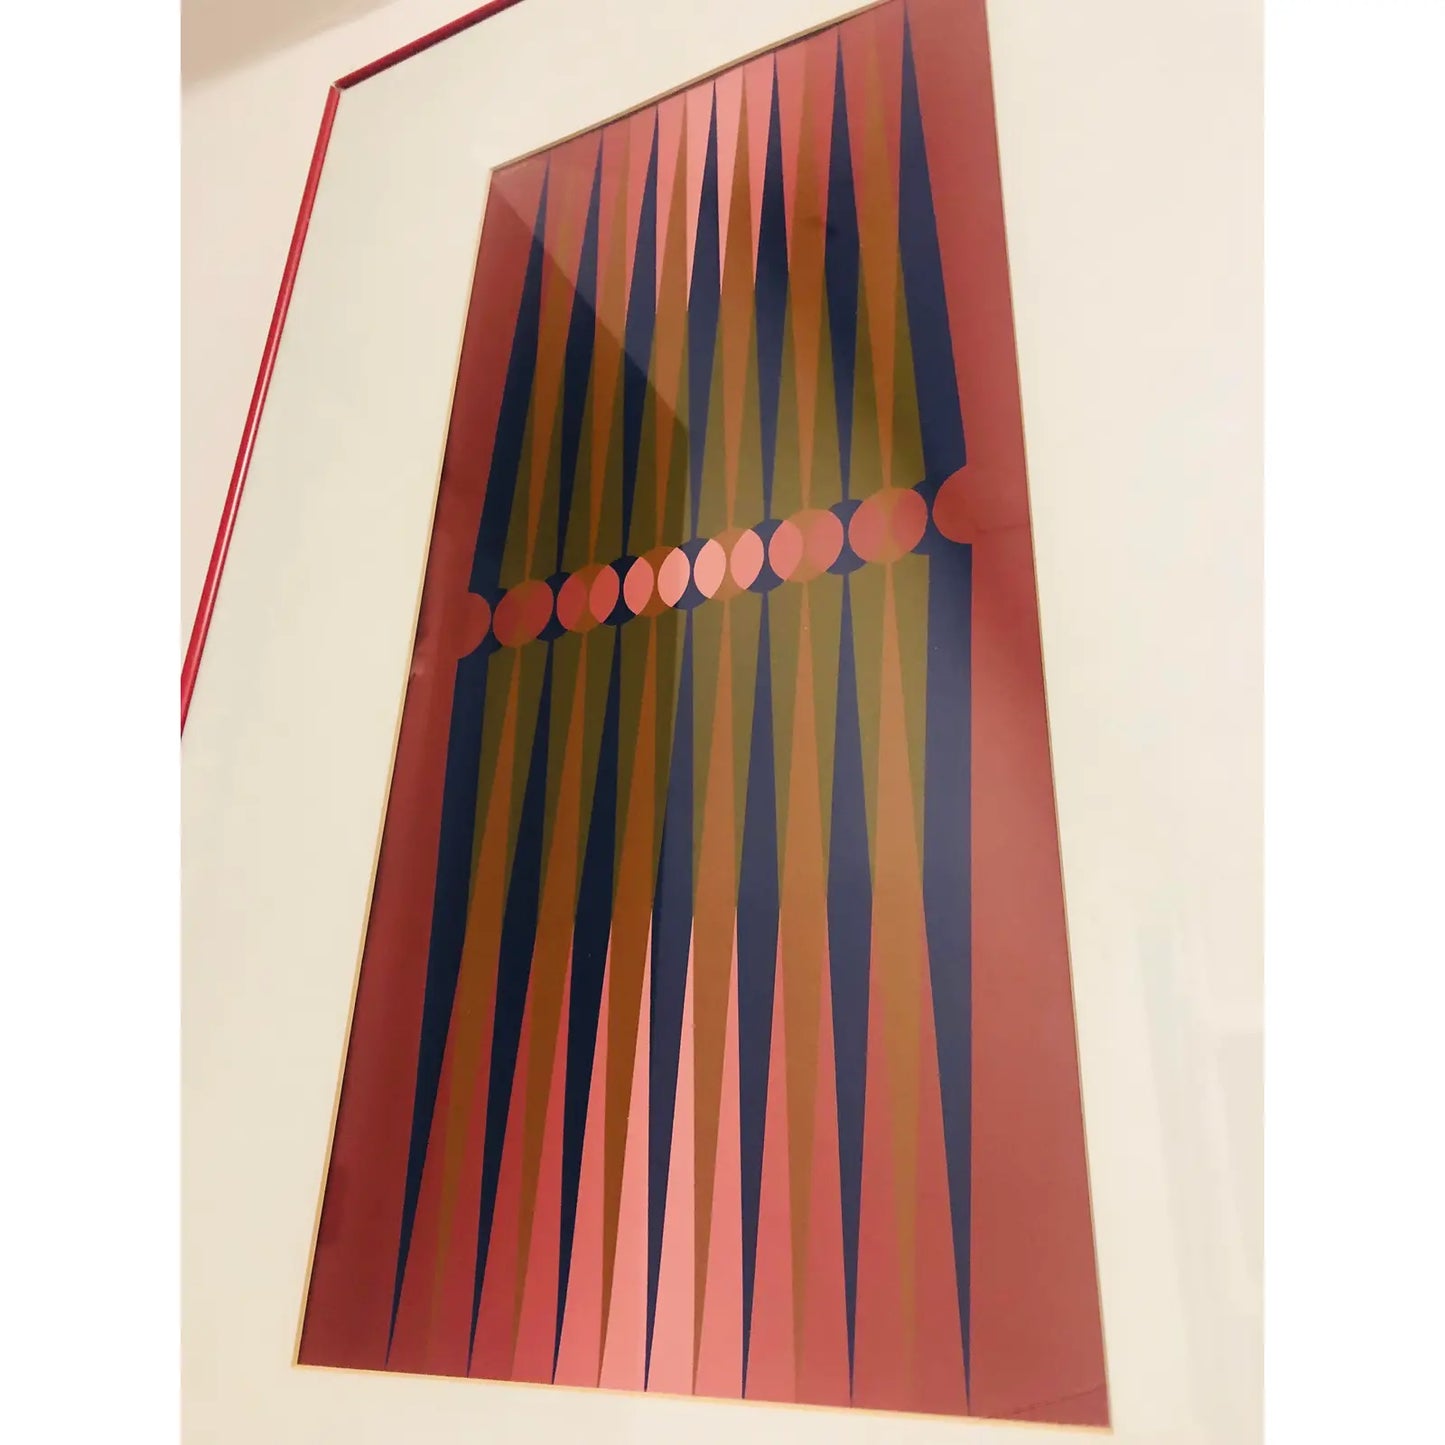 1970S OP ART PRINT BY DORDEVIC MIODRAG ON ACRYLIC PAPER